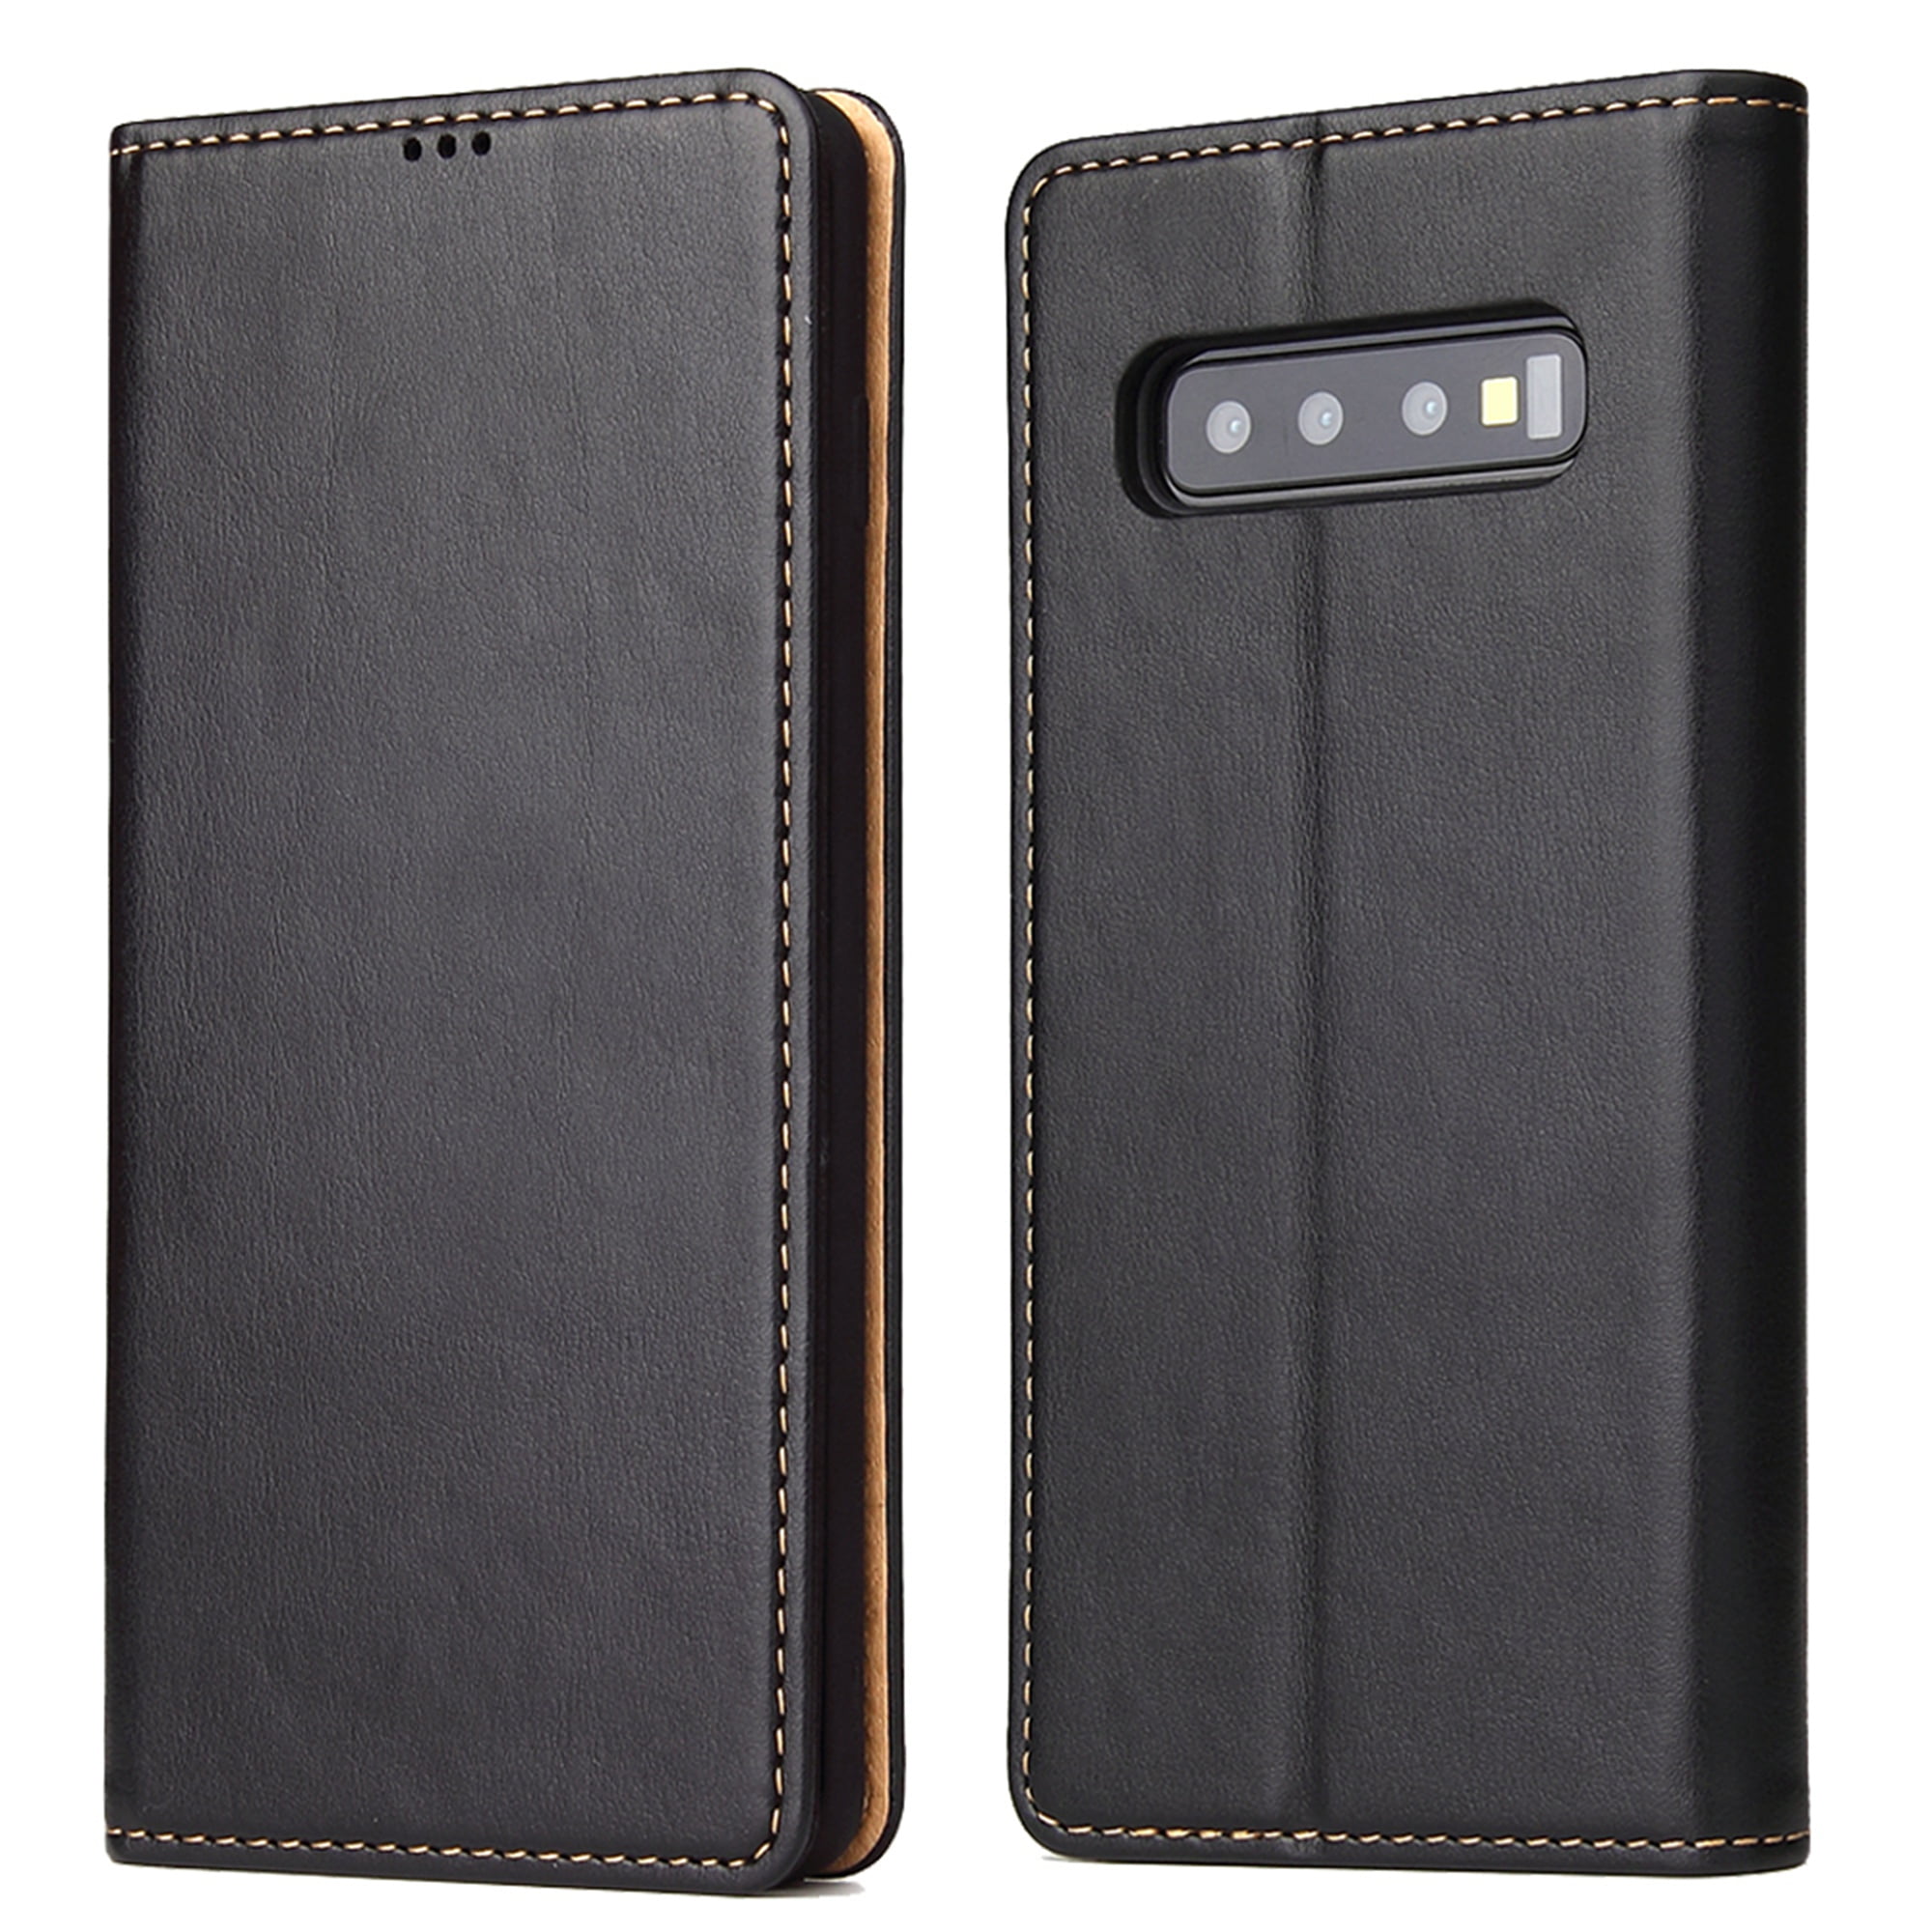 PU Leather Flip Cover Compatible with Samsung Galaxy S10e Black Wallet Case for Samsung Galaxy S10e 